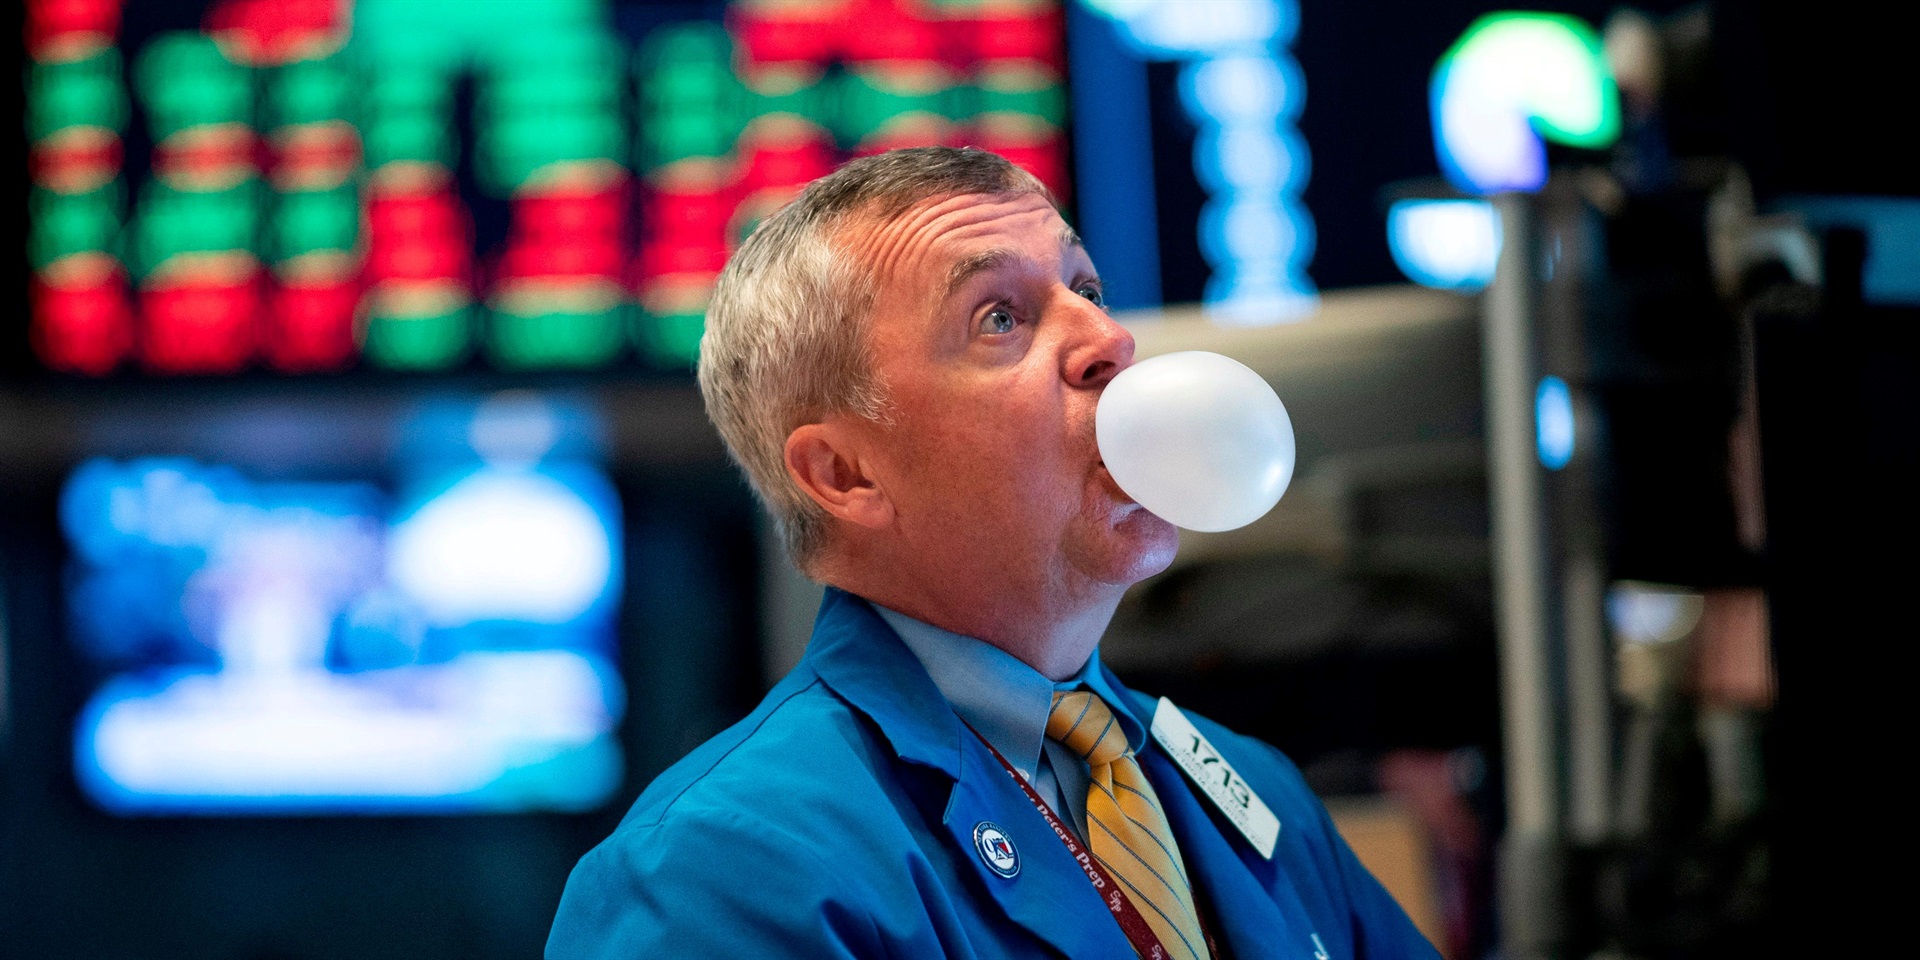 A trader blows bubble gum during the opening bell at the New York Stock Exchange (NYSE) on August 1, 2019, in New York City. Johannes Eisele/AFP via Getty Images